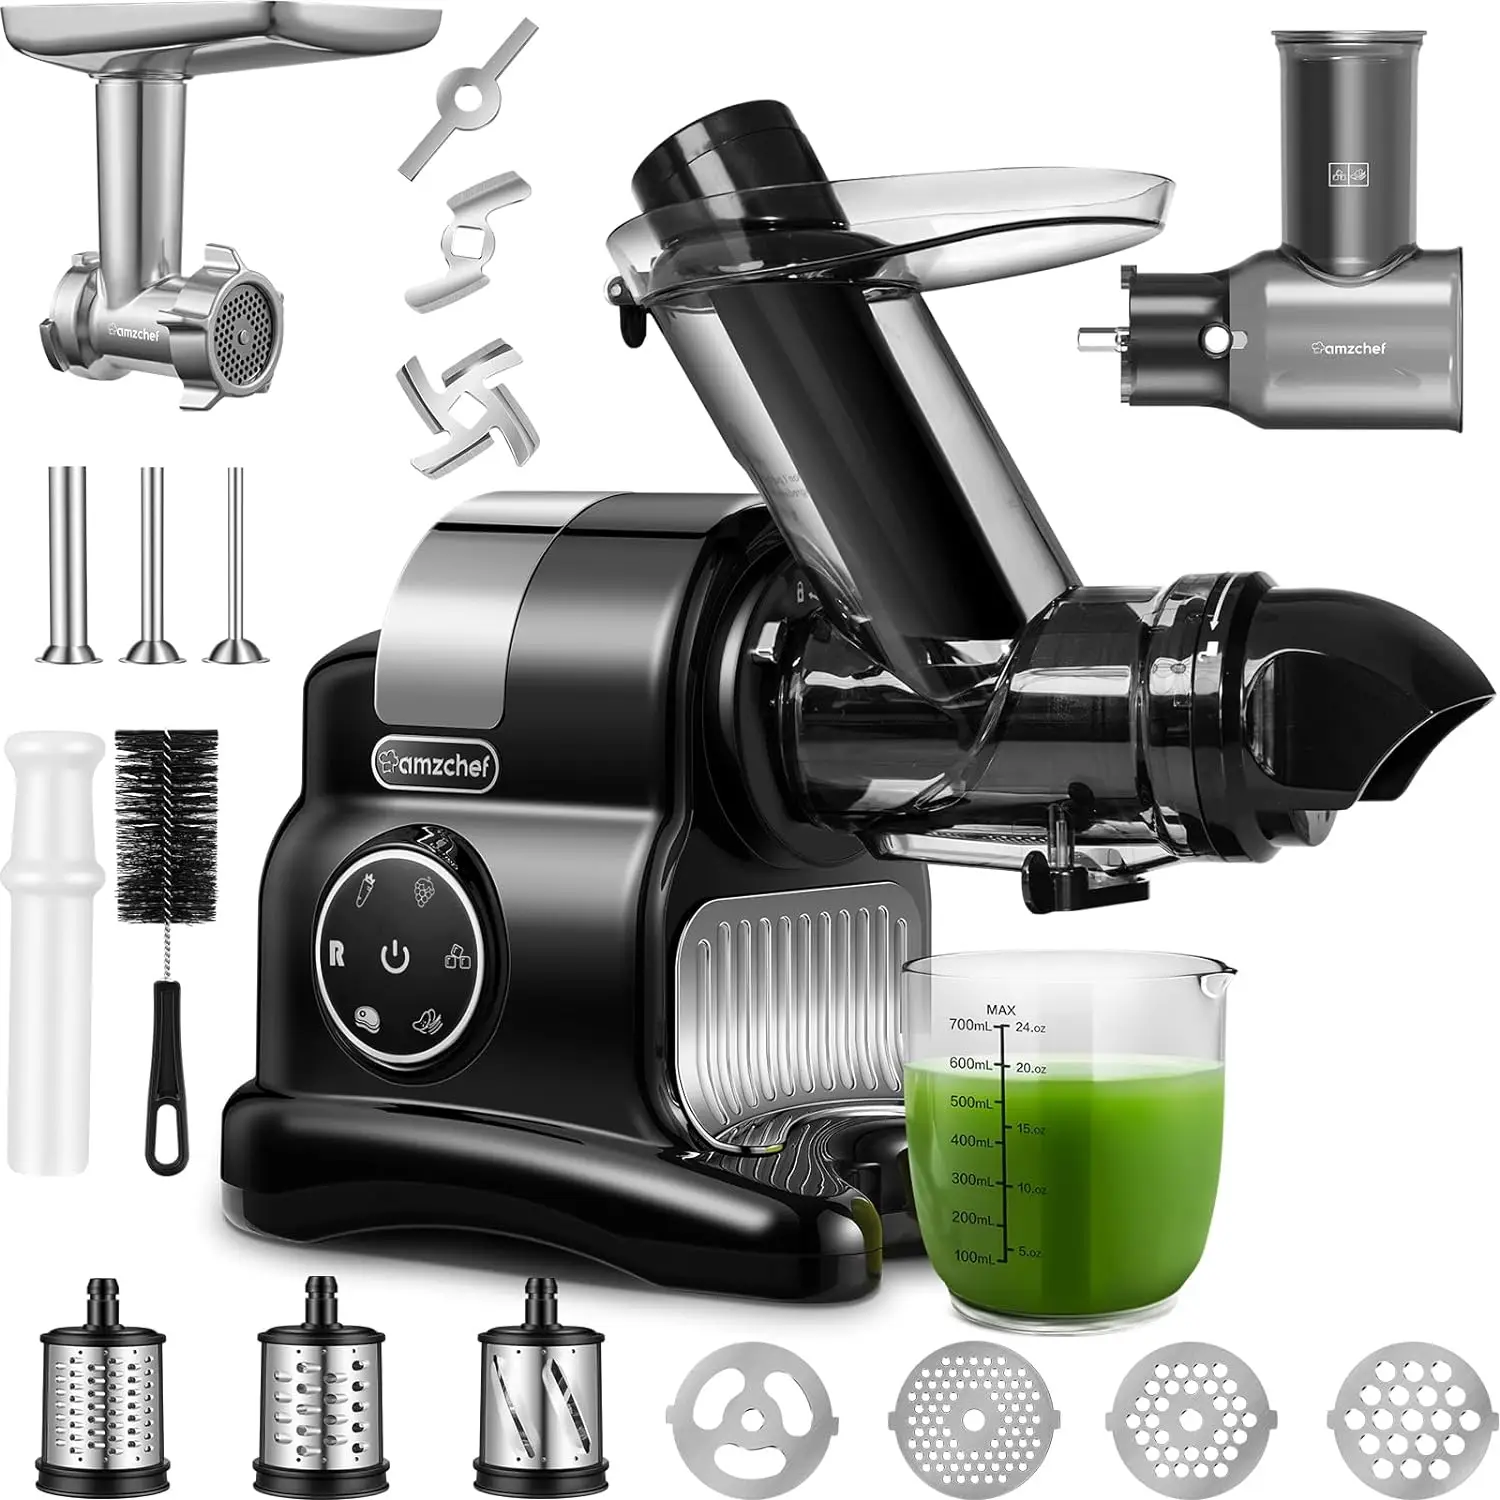 

AMZCHEF-5 in 1 Slow Masticating Juicer with Slicer and Shredder Attachment, Juice Vegetable Extractor